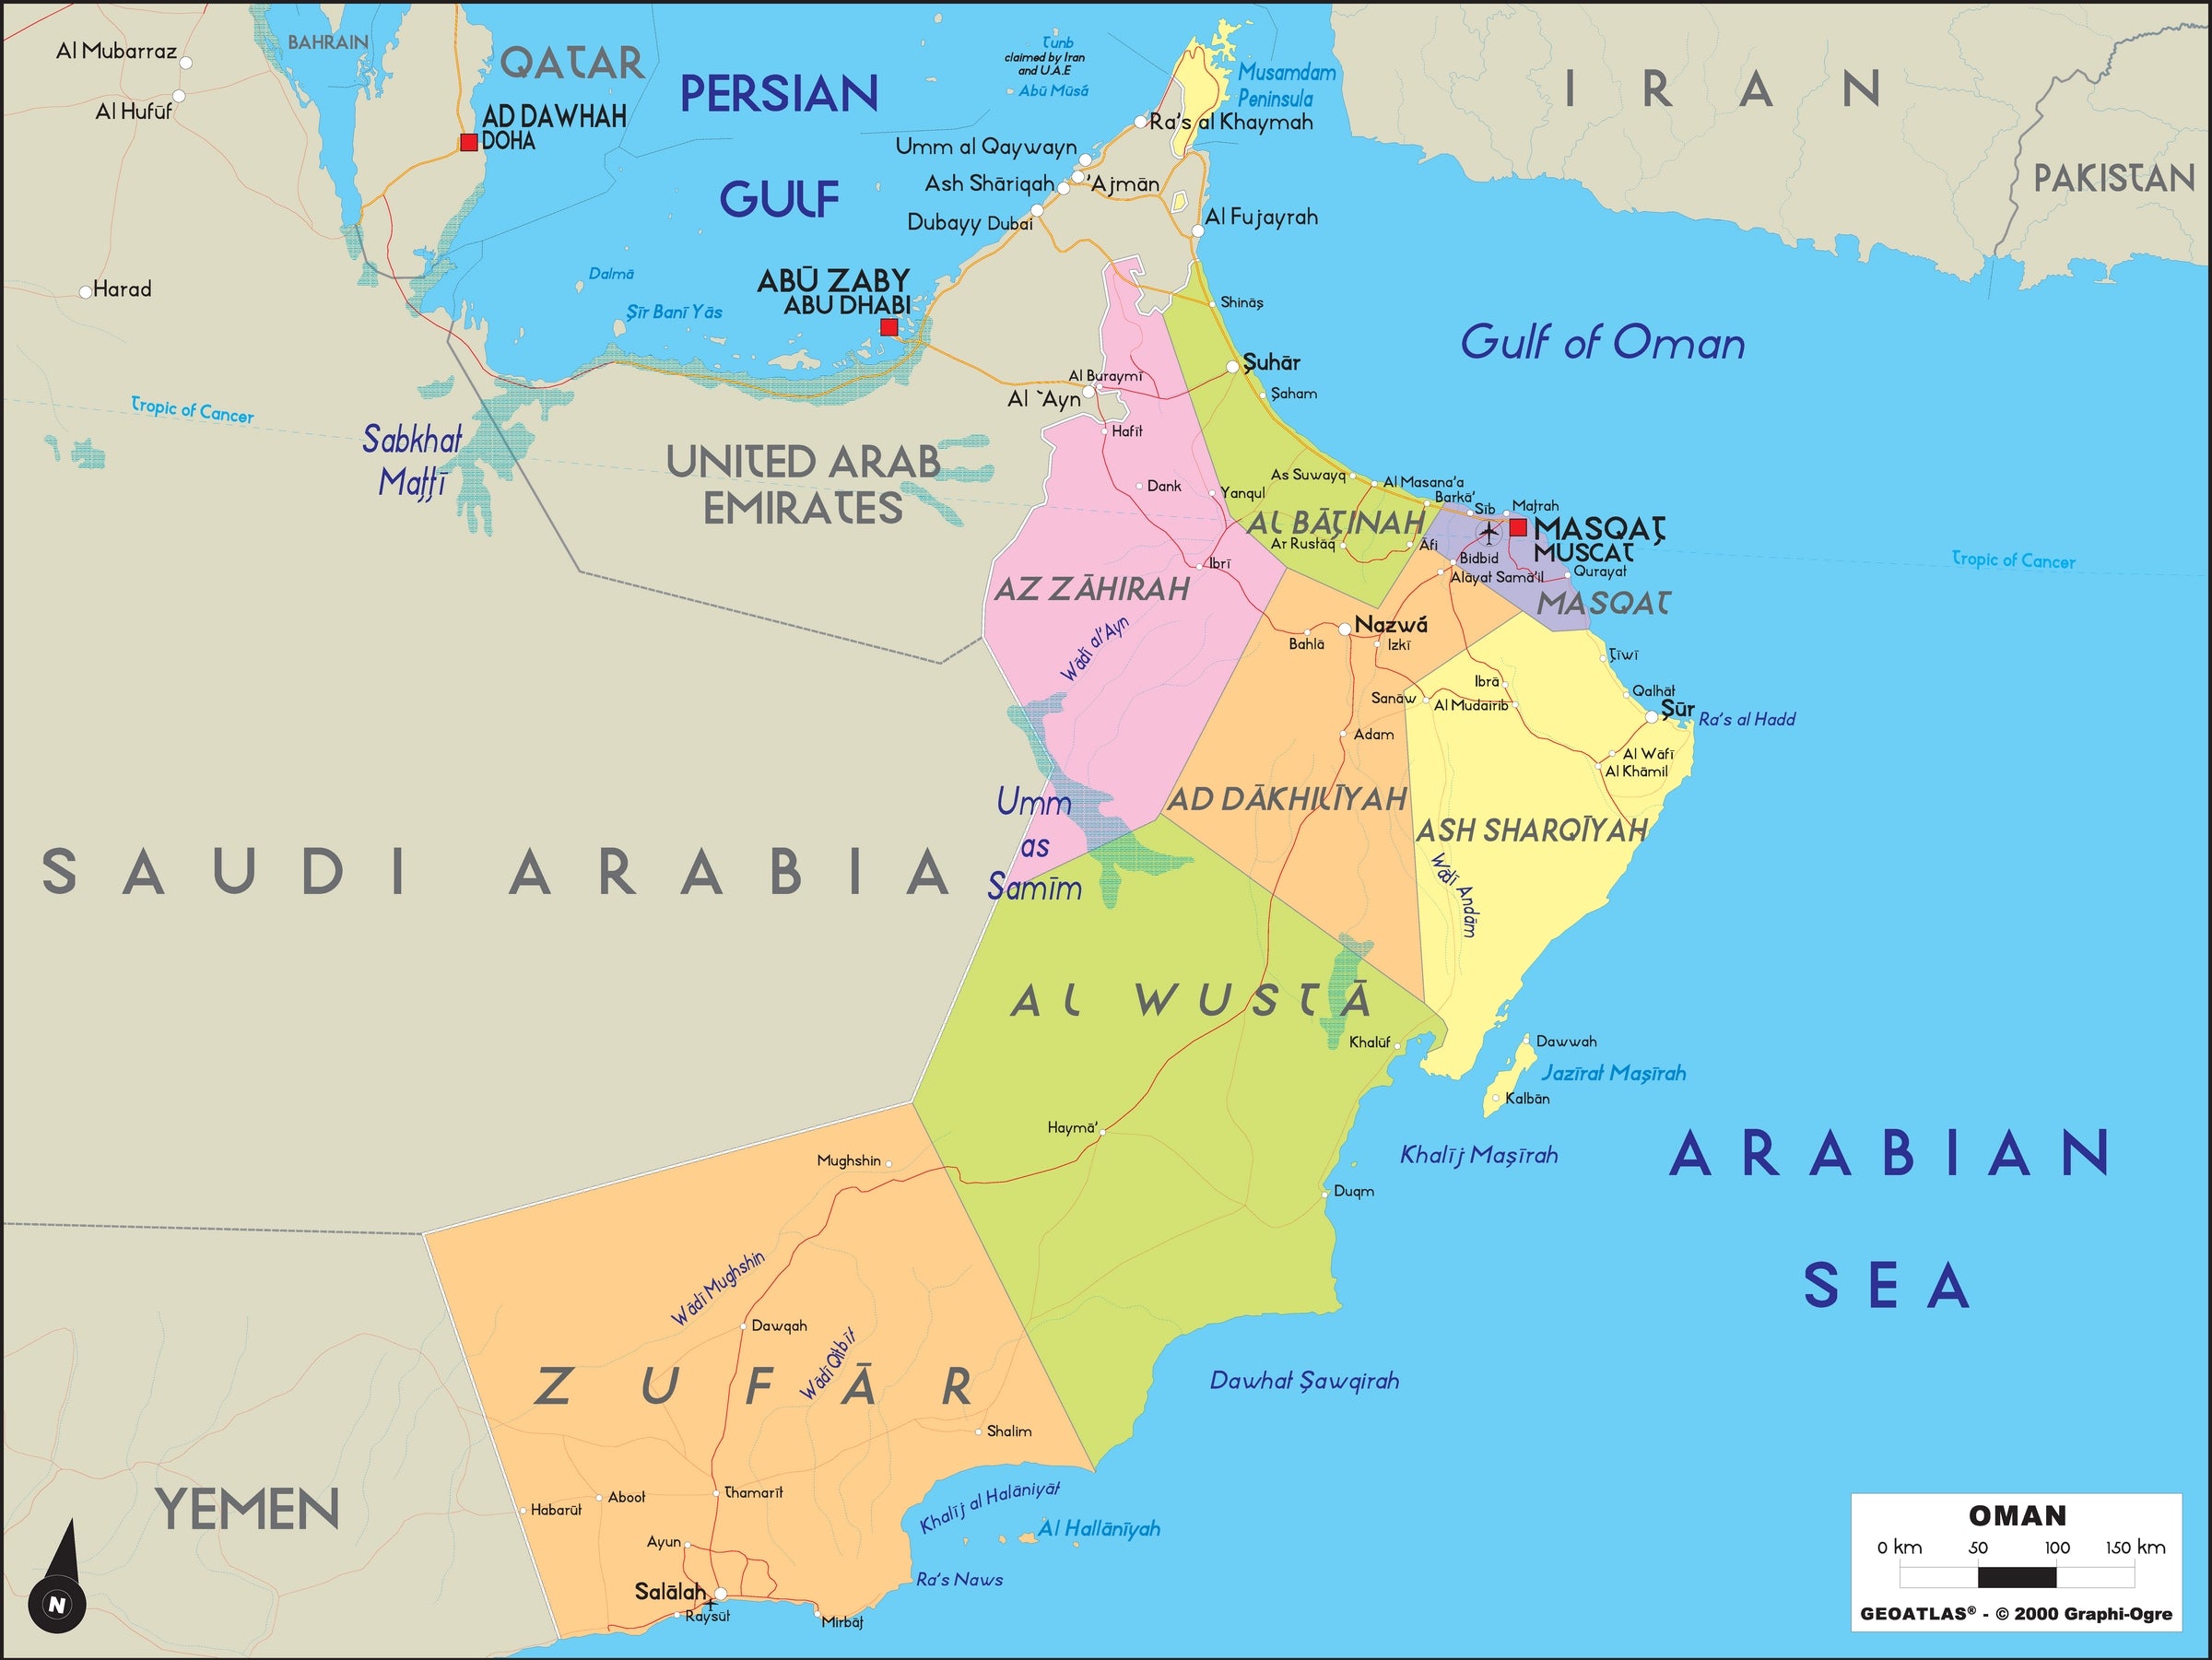 Where Is Oman Located Oman Location In The World Map